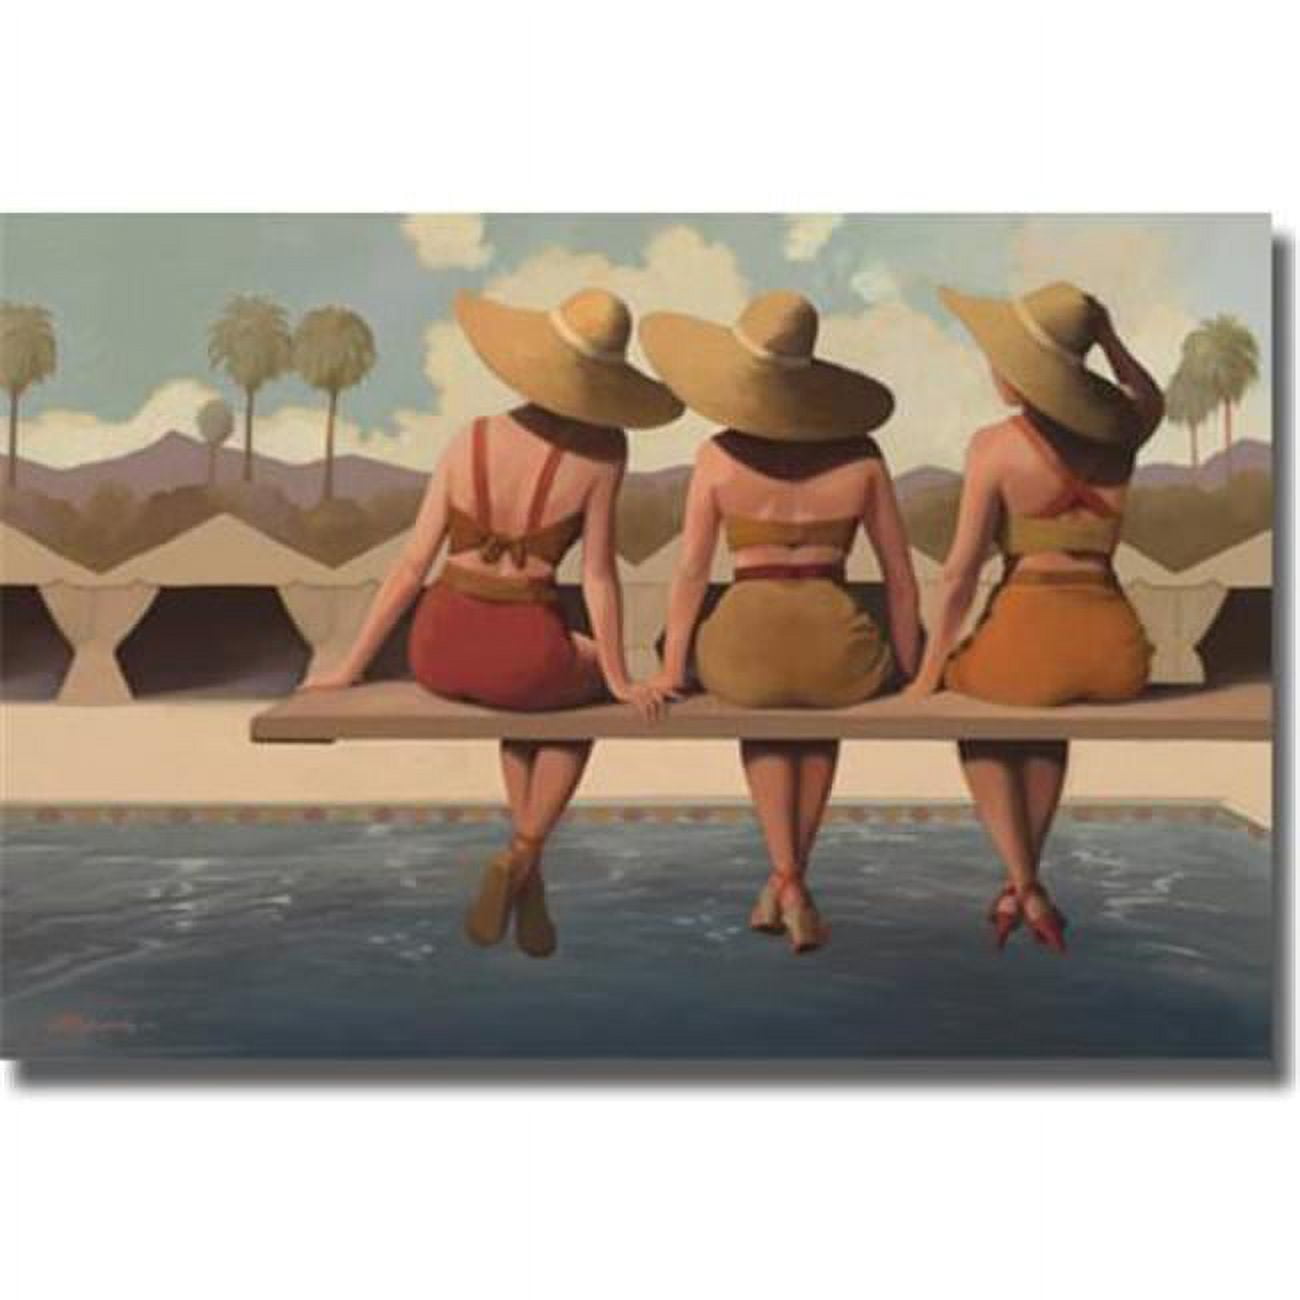 1624995eg Poolside Chat By Jacqueline Osborn Premium Gallery Wrapped Canvas Giclee Art - 16 X 24 X 1.5 In.